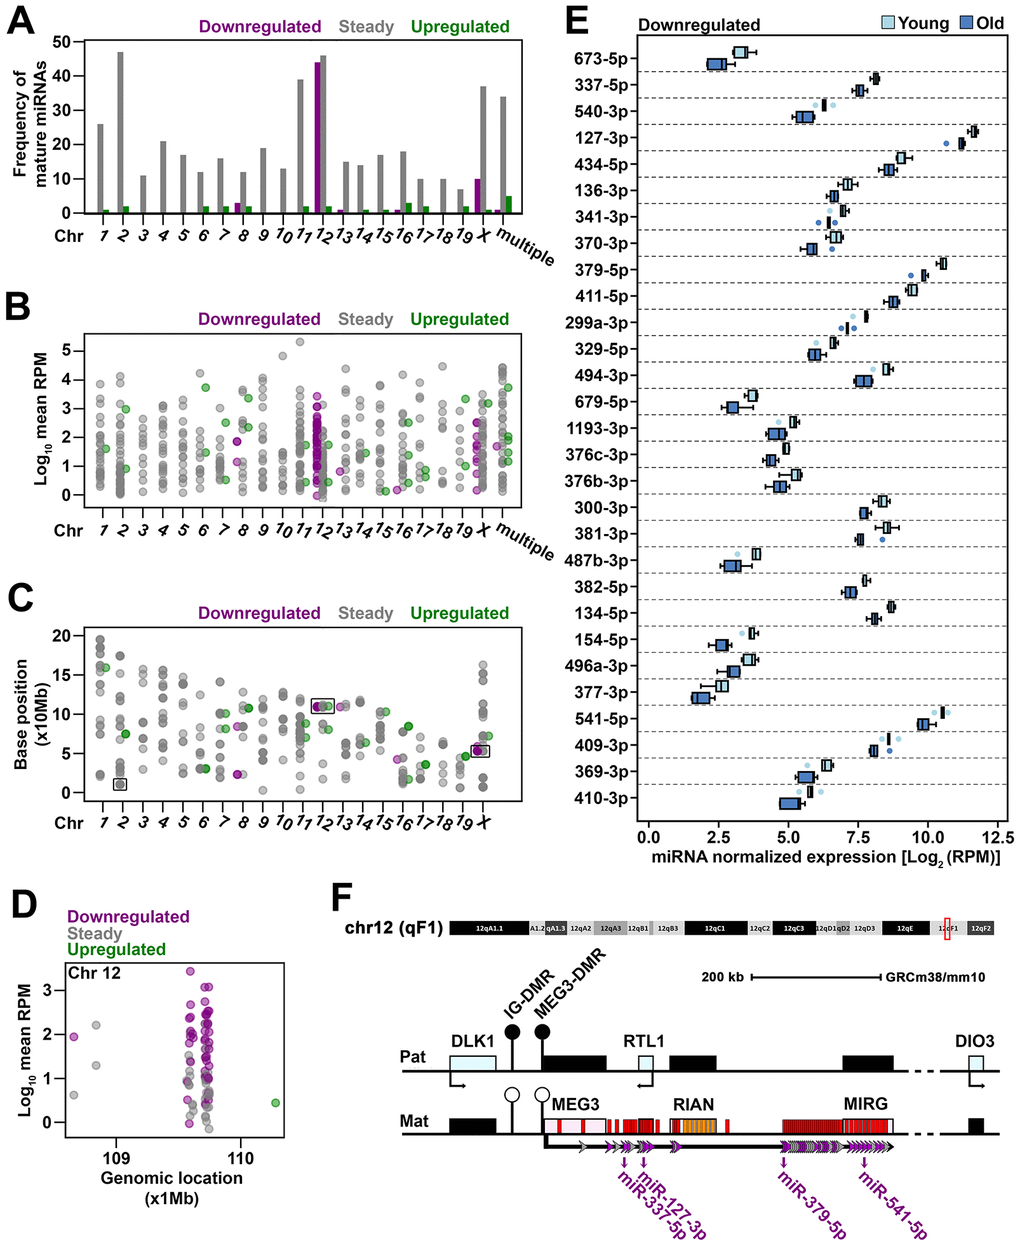 Genomic distribution of miRNAs sequenced in old cardiac fibroblasts (A) The frequency of mature miRNAs mapped to each mouse chromosome or to multiple chromosomes. (B) The expression level of mature miRNAs that mapped to each chromosome or to multiple chromosomes. (C) The genomic location of mature miRNAs represented by the position at which the corresponding gene begins. Mature miRNAs with multiple genomic locations were not depicted due to unknown source of expression given multiple loci. (D) The genomic location and expression level of miRNAs clustered on chromosome 12. (E) The expression of downregulated mature miRNAs mapped to Meg3-Mirg locus in old and young cardiac fibroblasts. When both -3p and -5p strands were detected, the one with greater expression was considered as representative for the respective miRNA gene. MiRNAs were ordered based on their location within the Meg3-Mirg cluster. (F) Schematic representation of the Meg3-Mirg locus as part of the Dlk1-Dio3 paternally imprinted locus. Meg3-Mirg locus is expressed from the maternal allele and comprises only non-coding RNAs, i.e. lncRNA (Meg3, Rian, Mirg), snoRNAs (orange bars) and miRNAs (red bars). MiRNA genes expressed in cardiac fibroblasts are illustrated as arrows: grey arrows depict steady miRNA, and purple arrows show downregulated miRNAs. MiRNAs chosen as representative for Meg3-Mirg cluster are emphasized. Additional information is shown in Supplementary Figure 2.